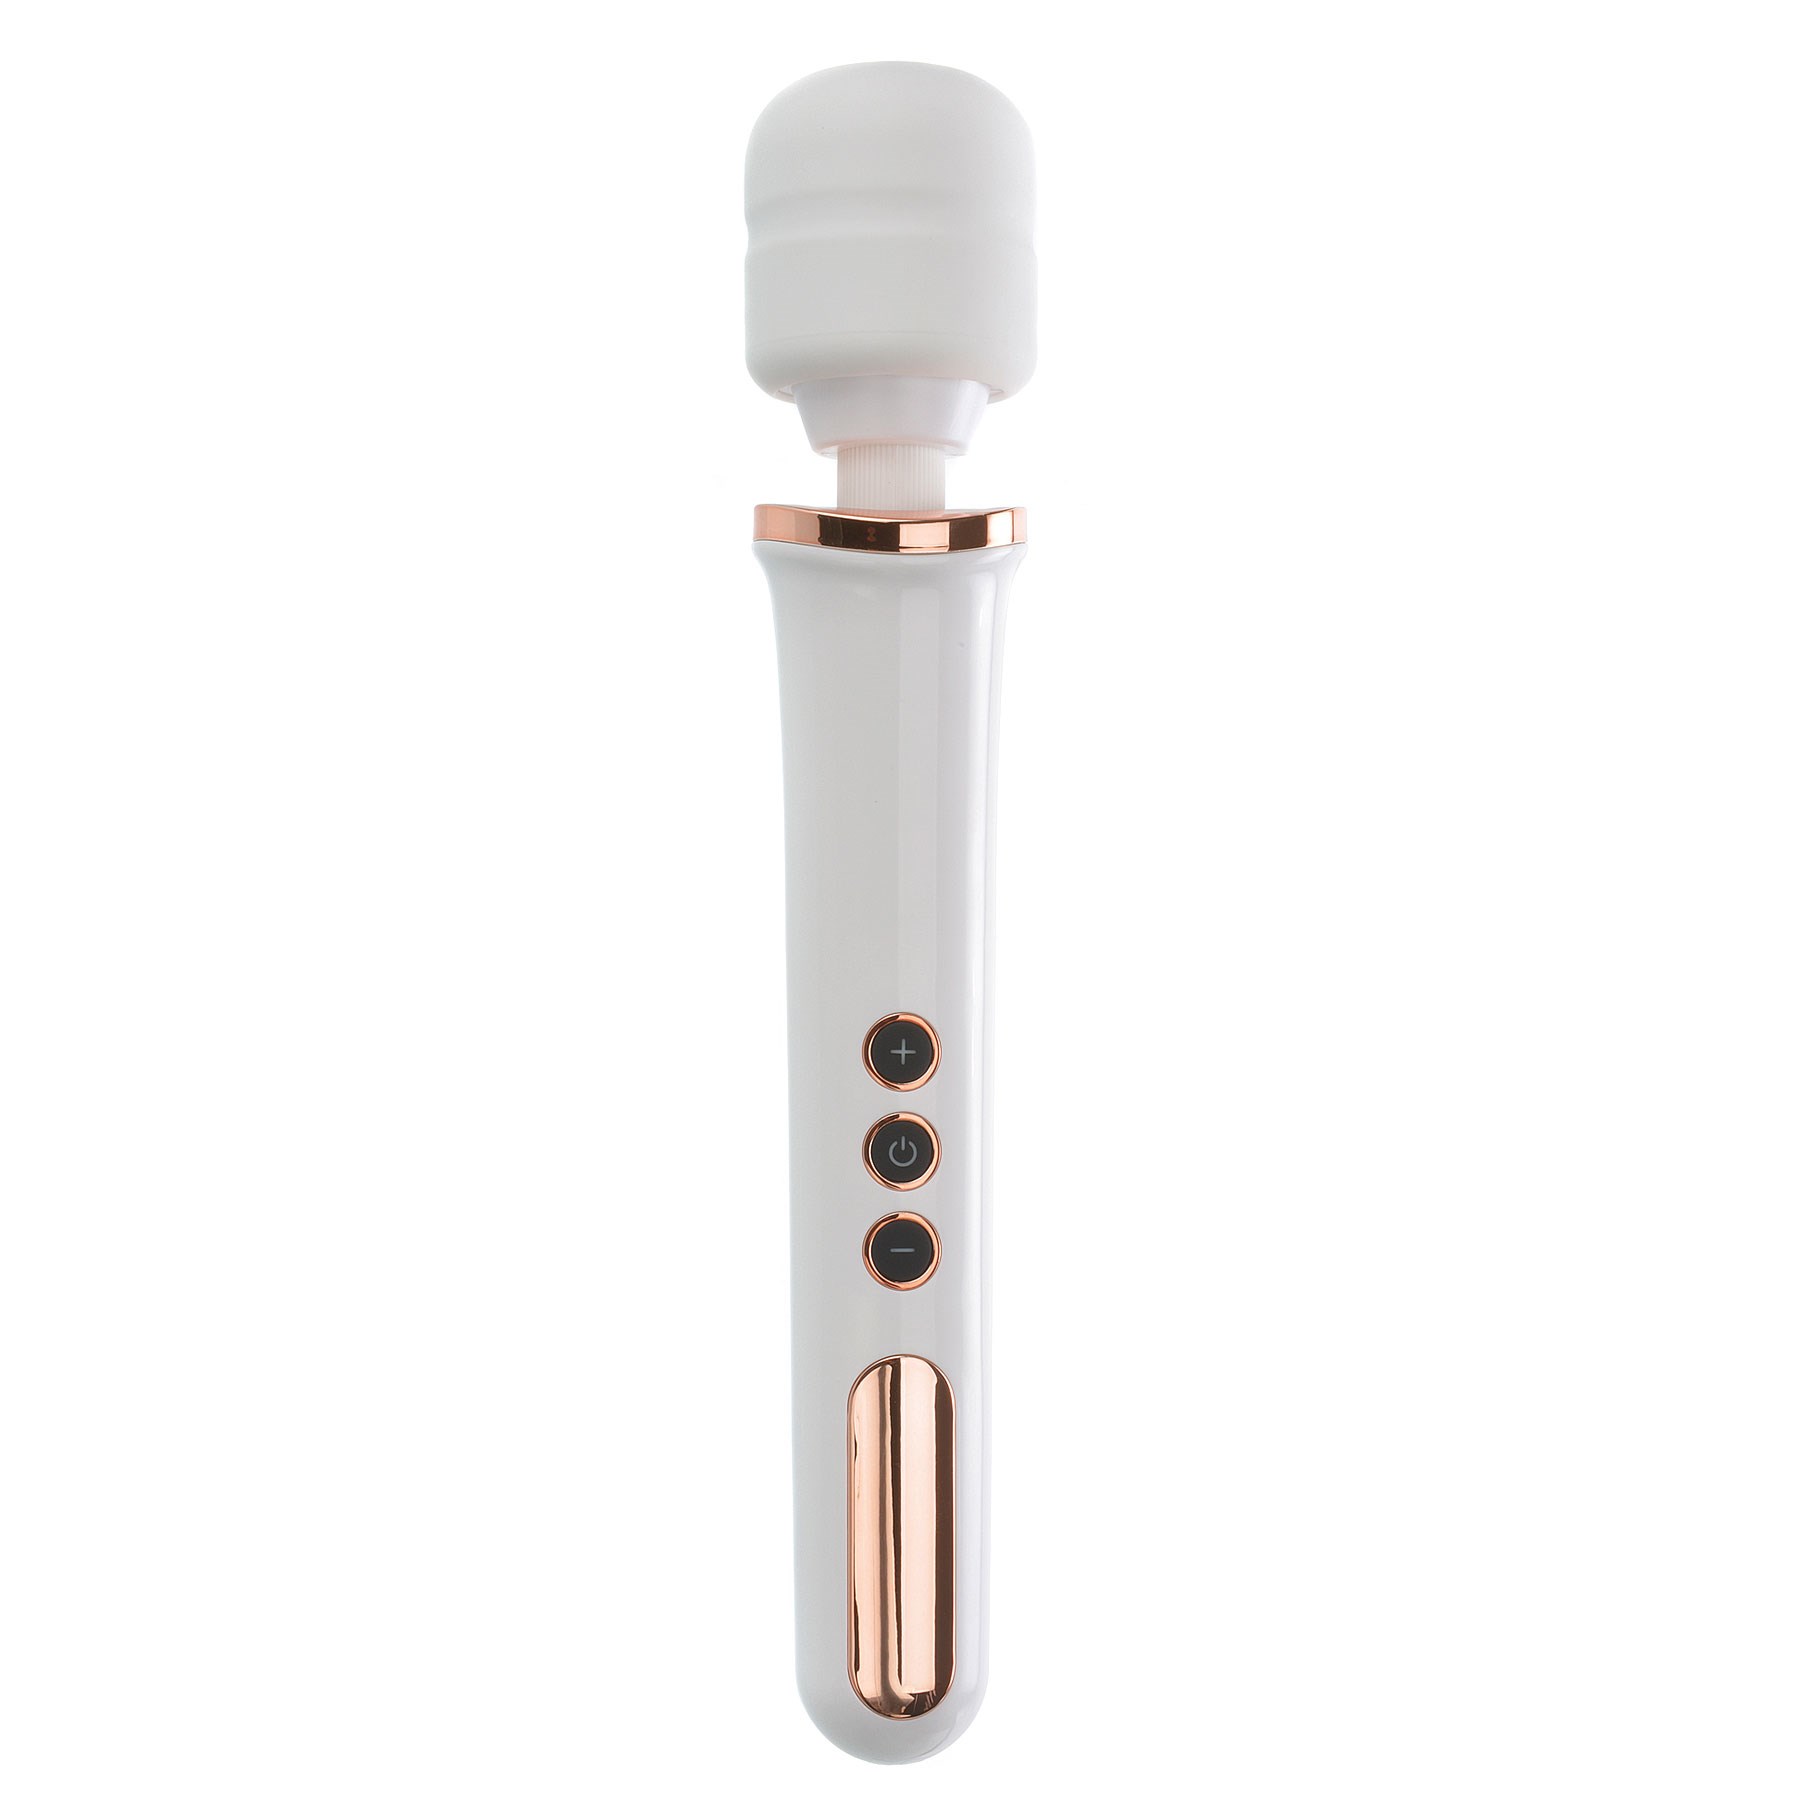 Adam & Eve Magic Massager Rechargeable Rose Edition controls